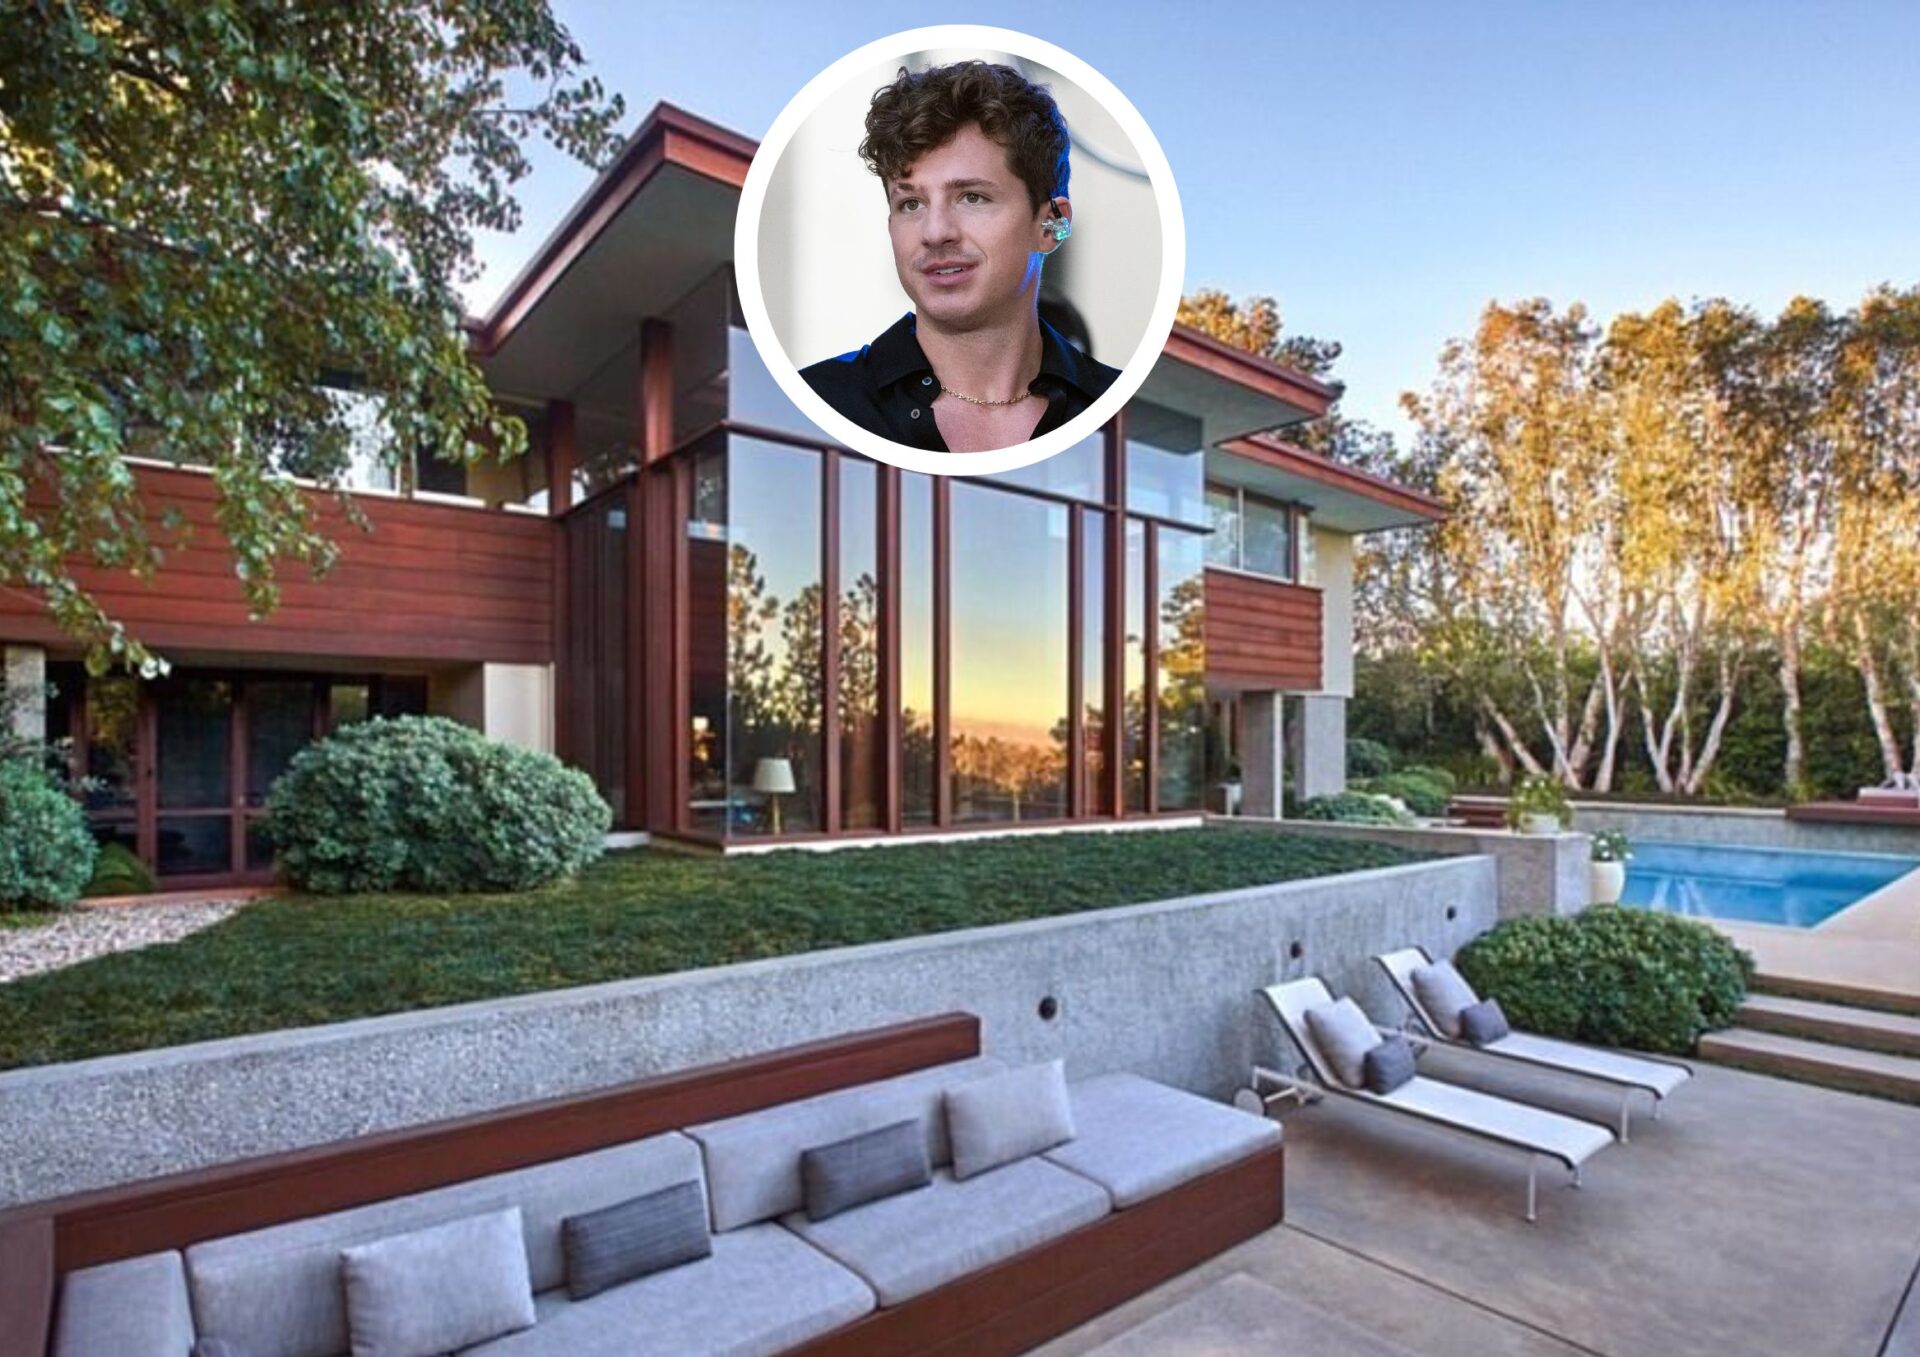 Charlie Puth's Rex Lotery Designed House